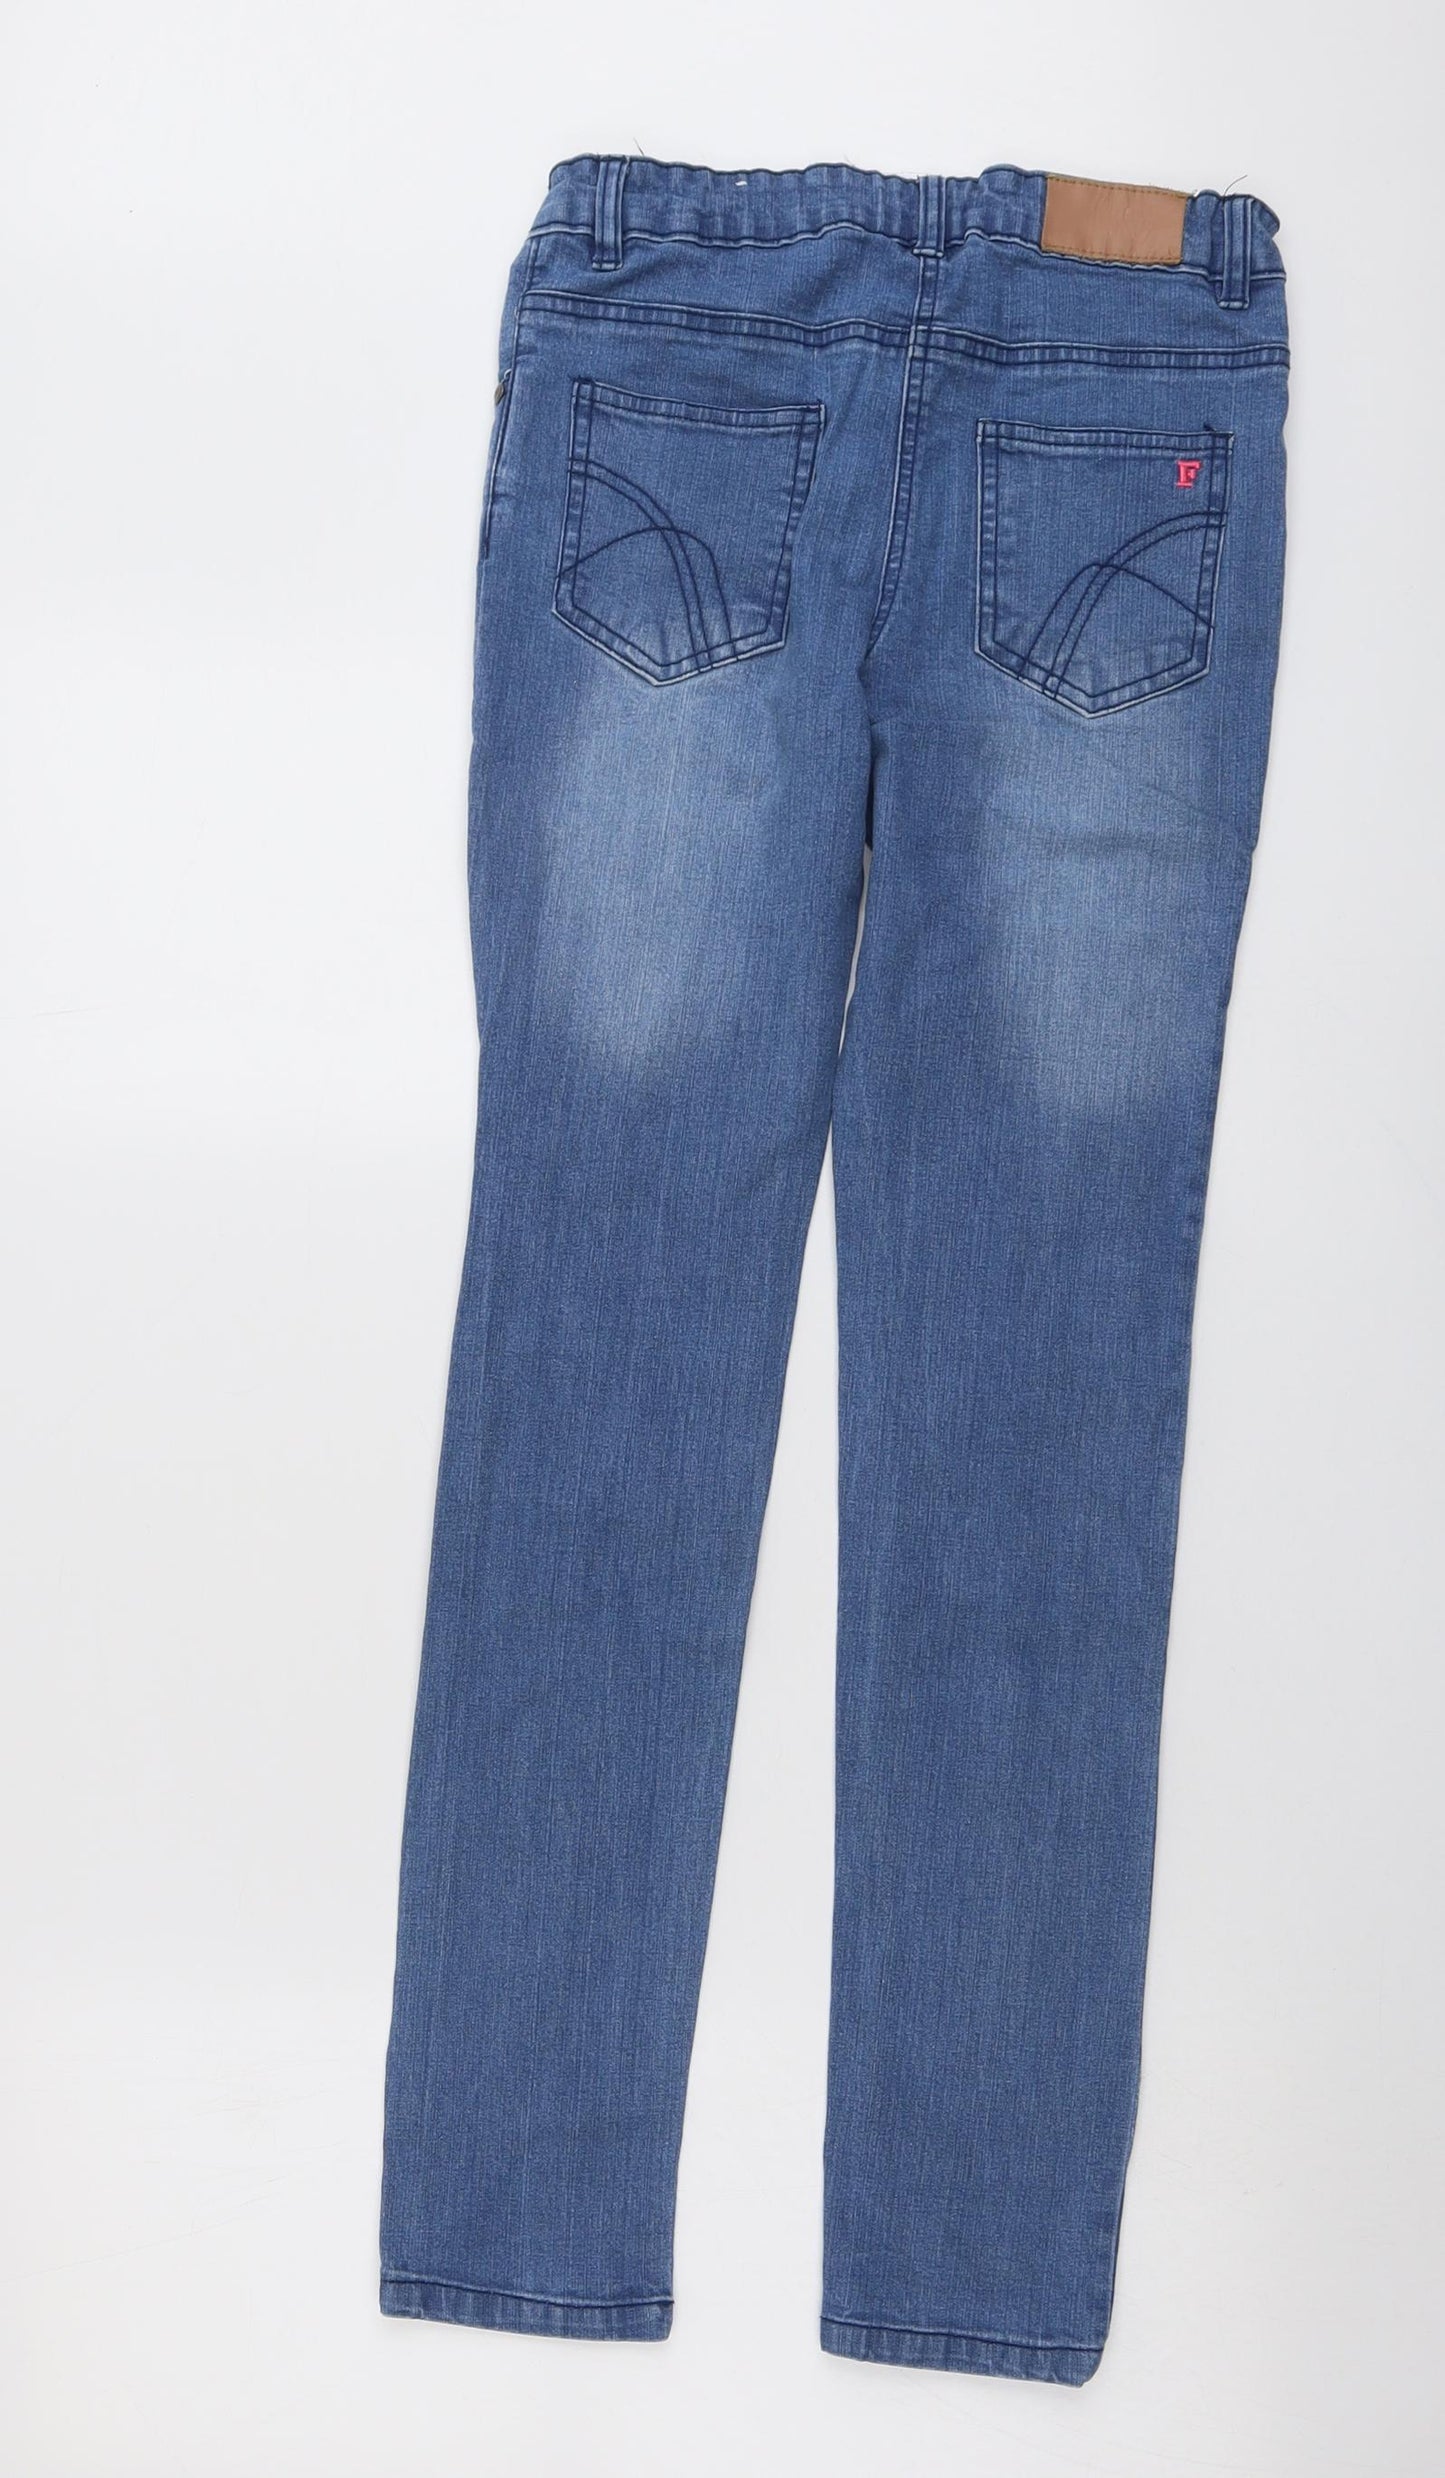 French Connection Girls Blue Cotton Skinny Jeans Size 12-13 Years Regular Button